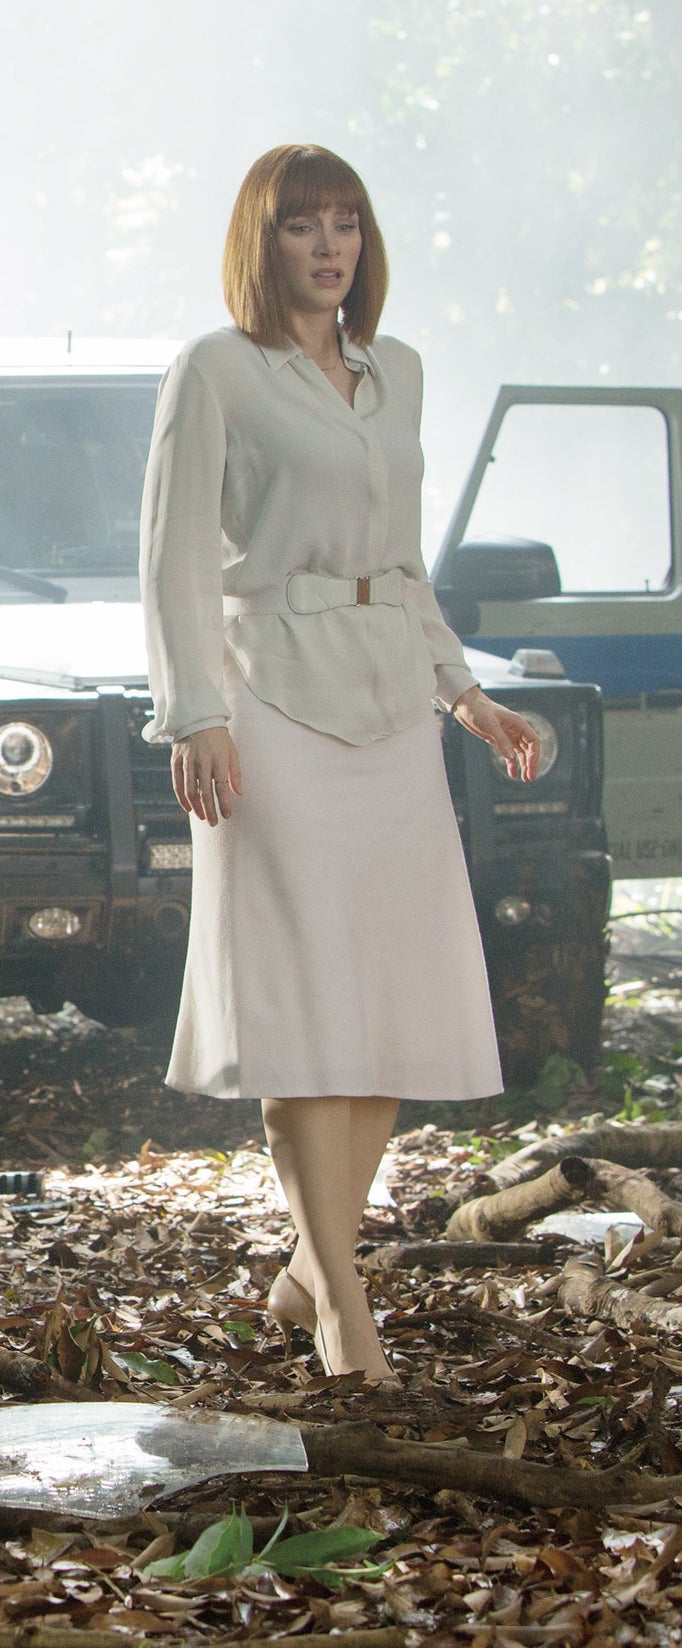 Claire stands in heels in the wreckage